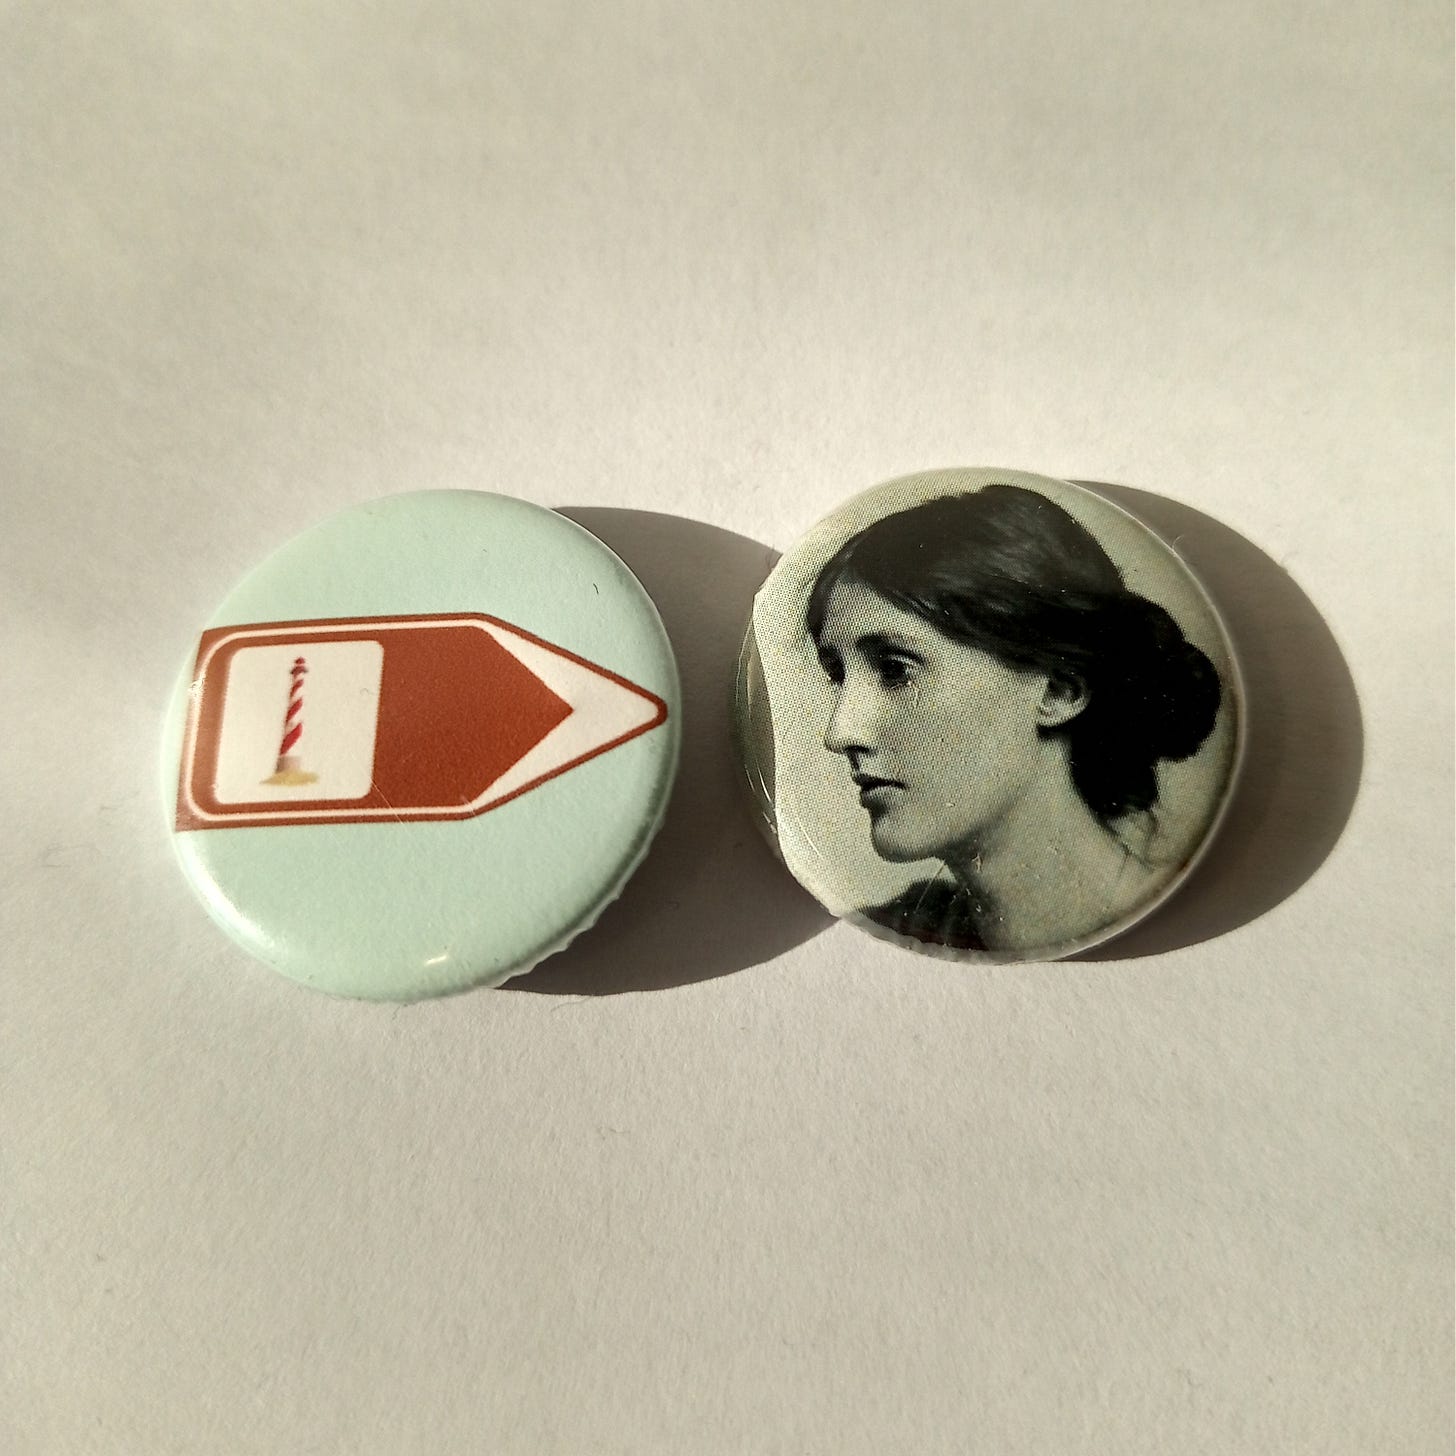 Two button badges in sunlight, one with a tourist sign pointing towards a lighthouse, one with a photograph of Virginia Woolf in profile